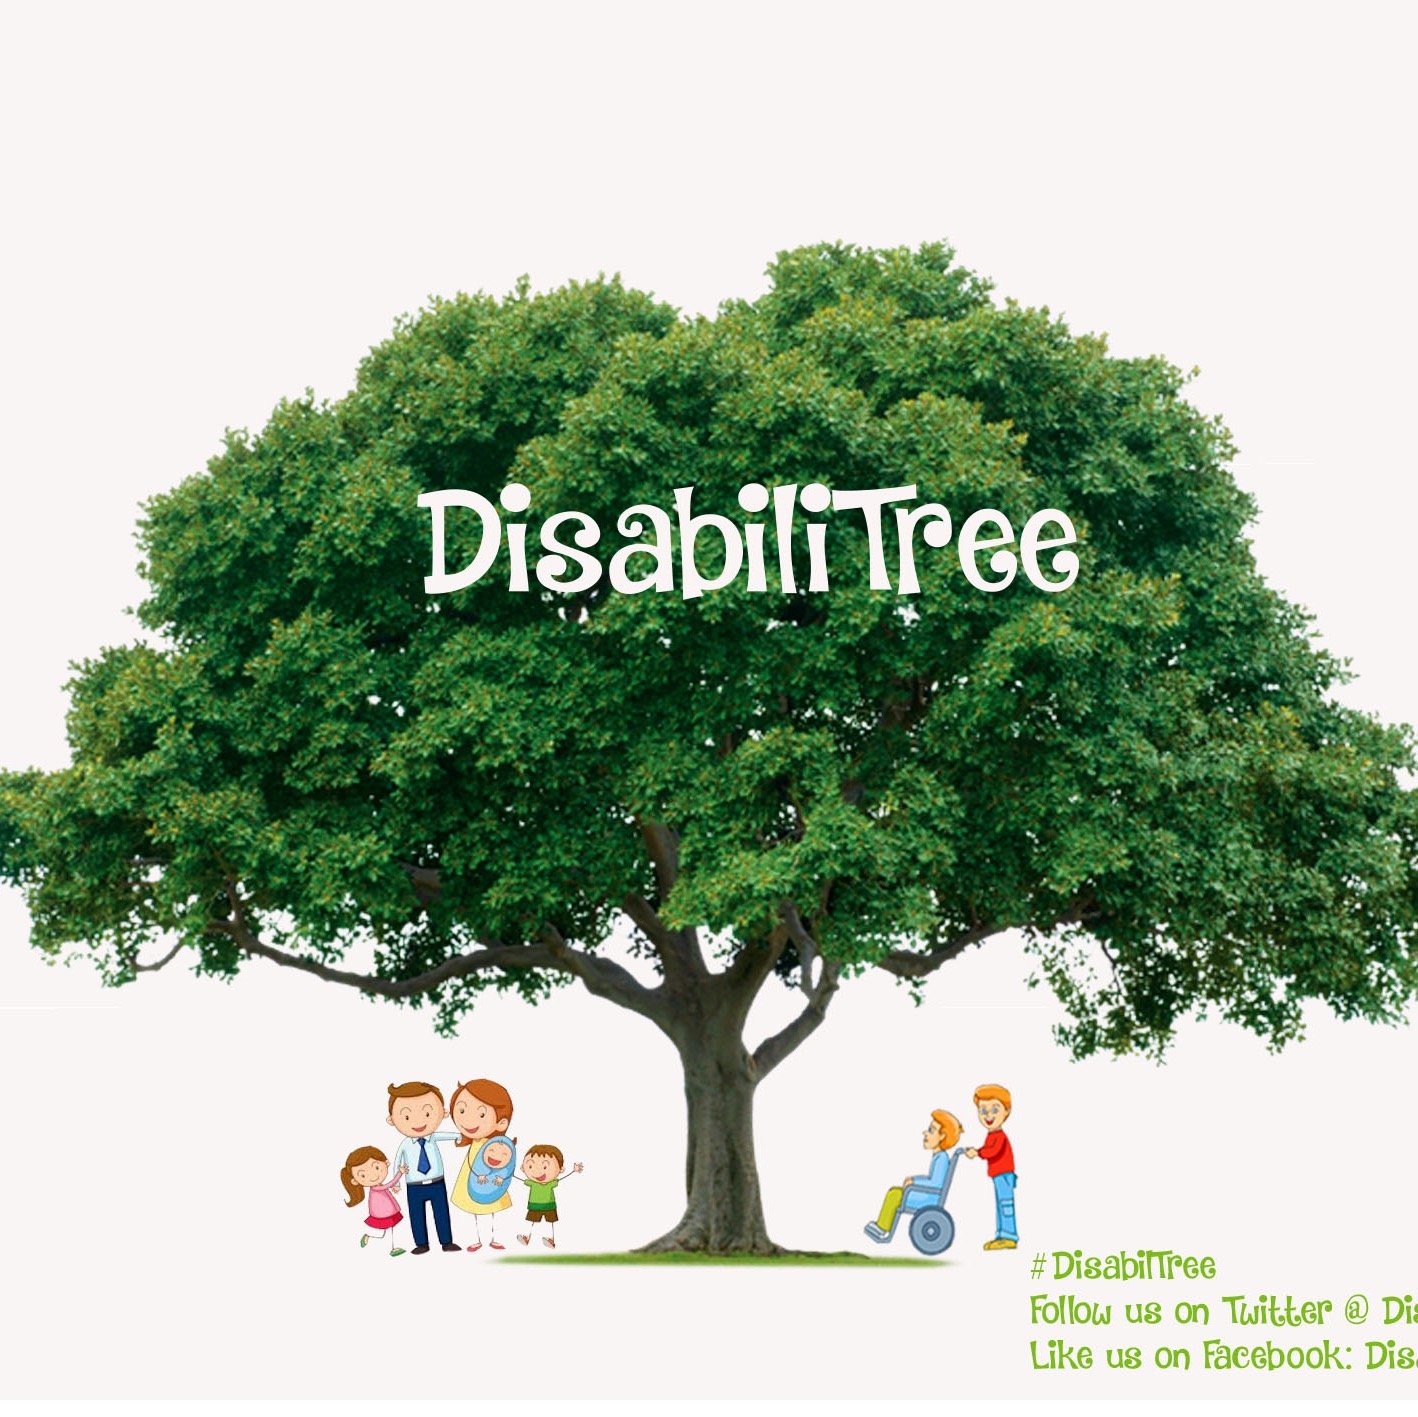 DisabiliTree is our campaign which aims to raise awareness and money in order to improve the accessability of Epping Forest for disabled people